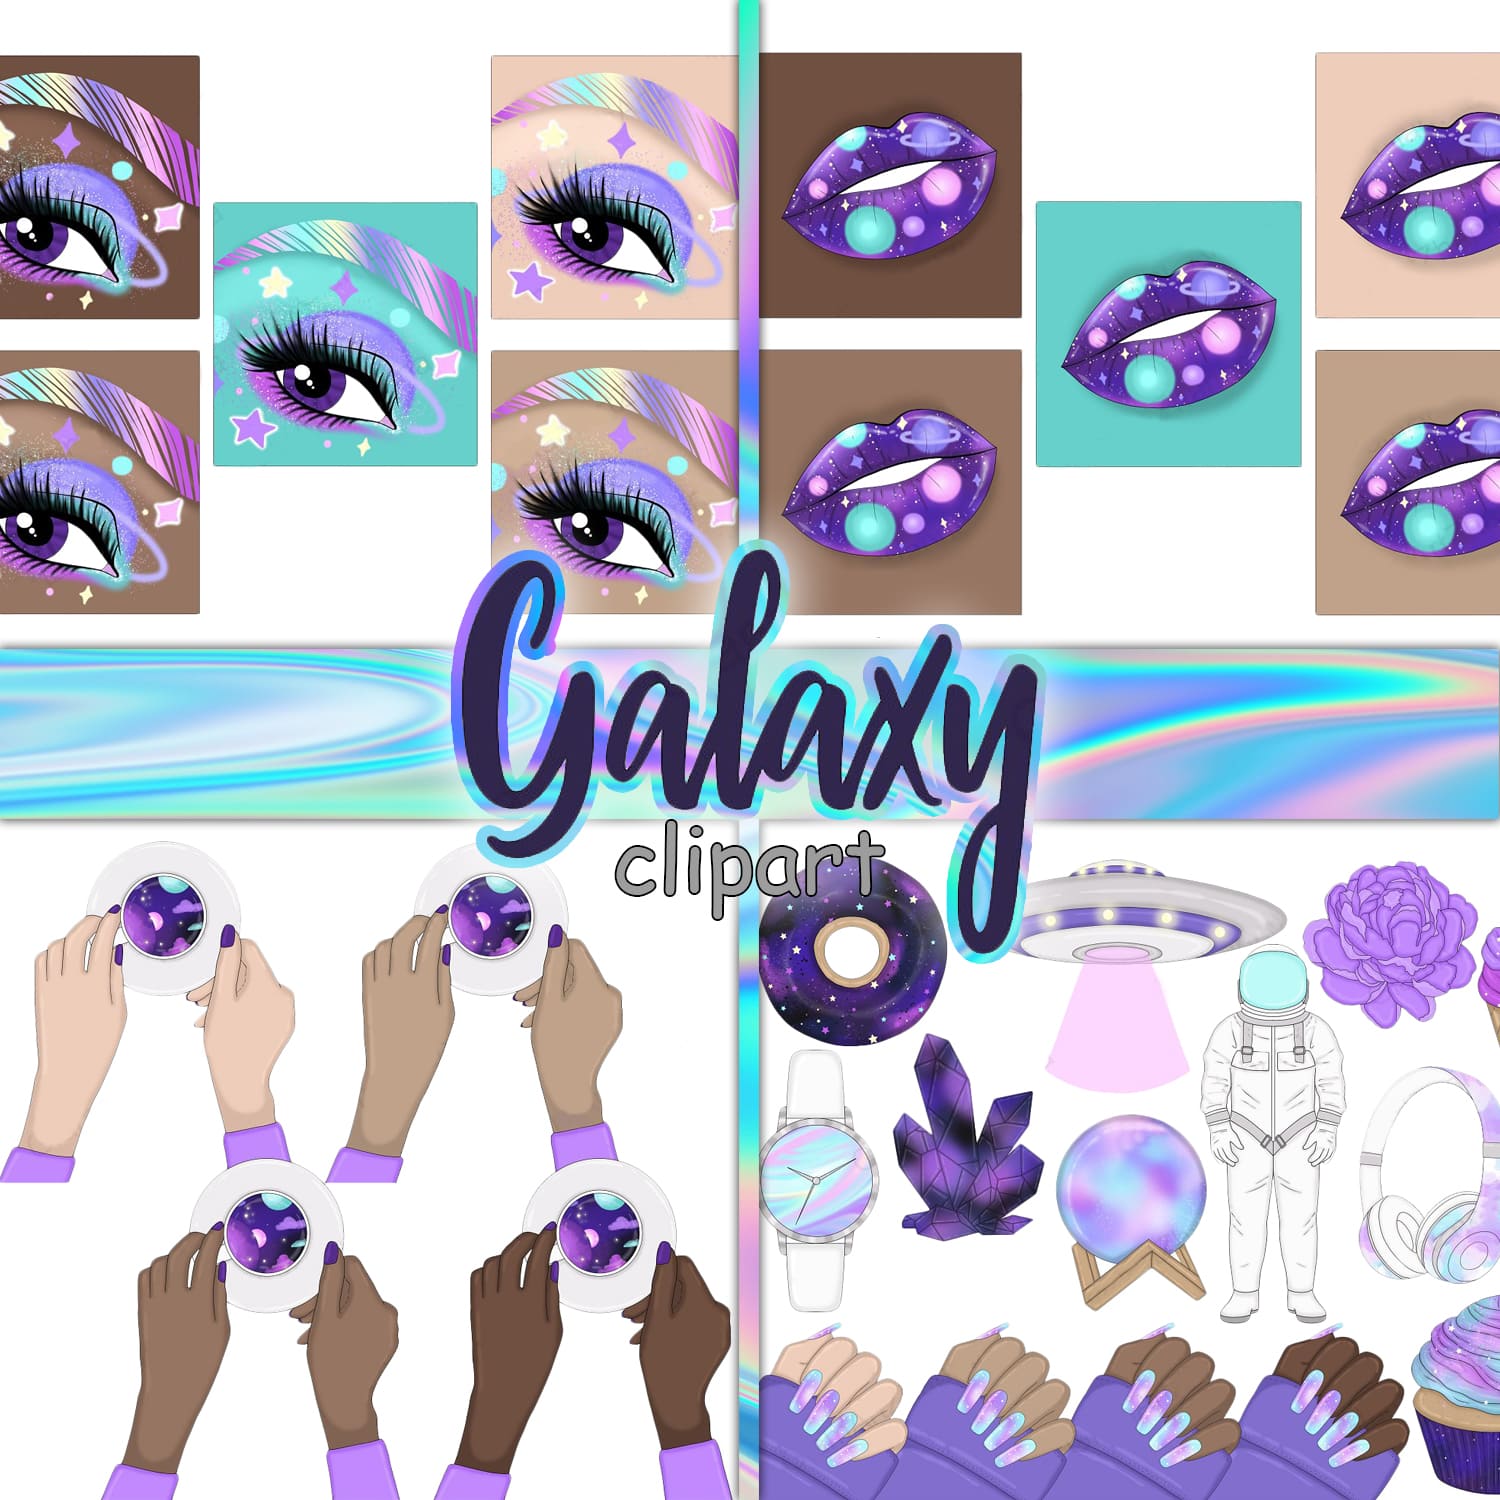 galaxy clipart graphics.